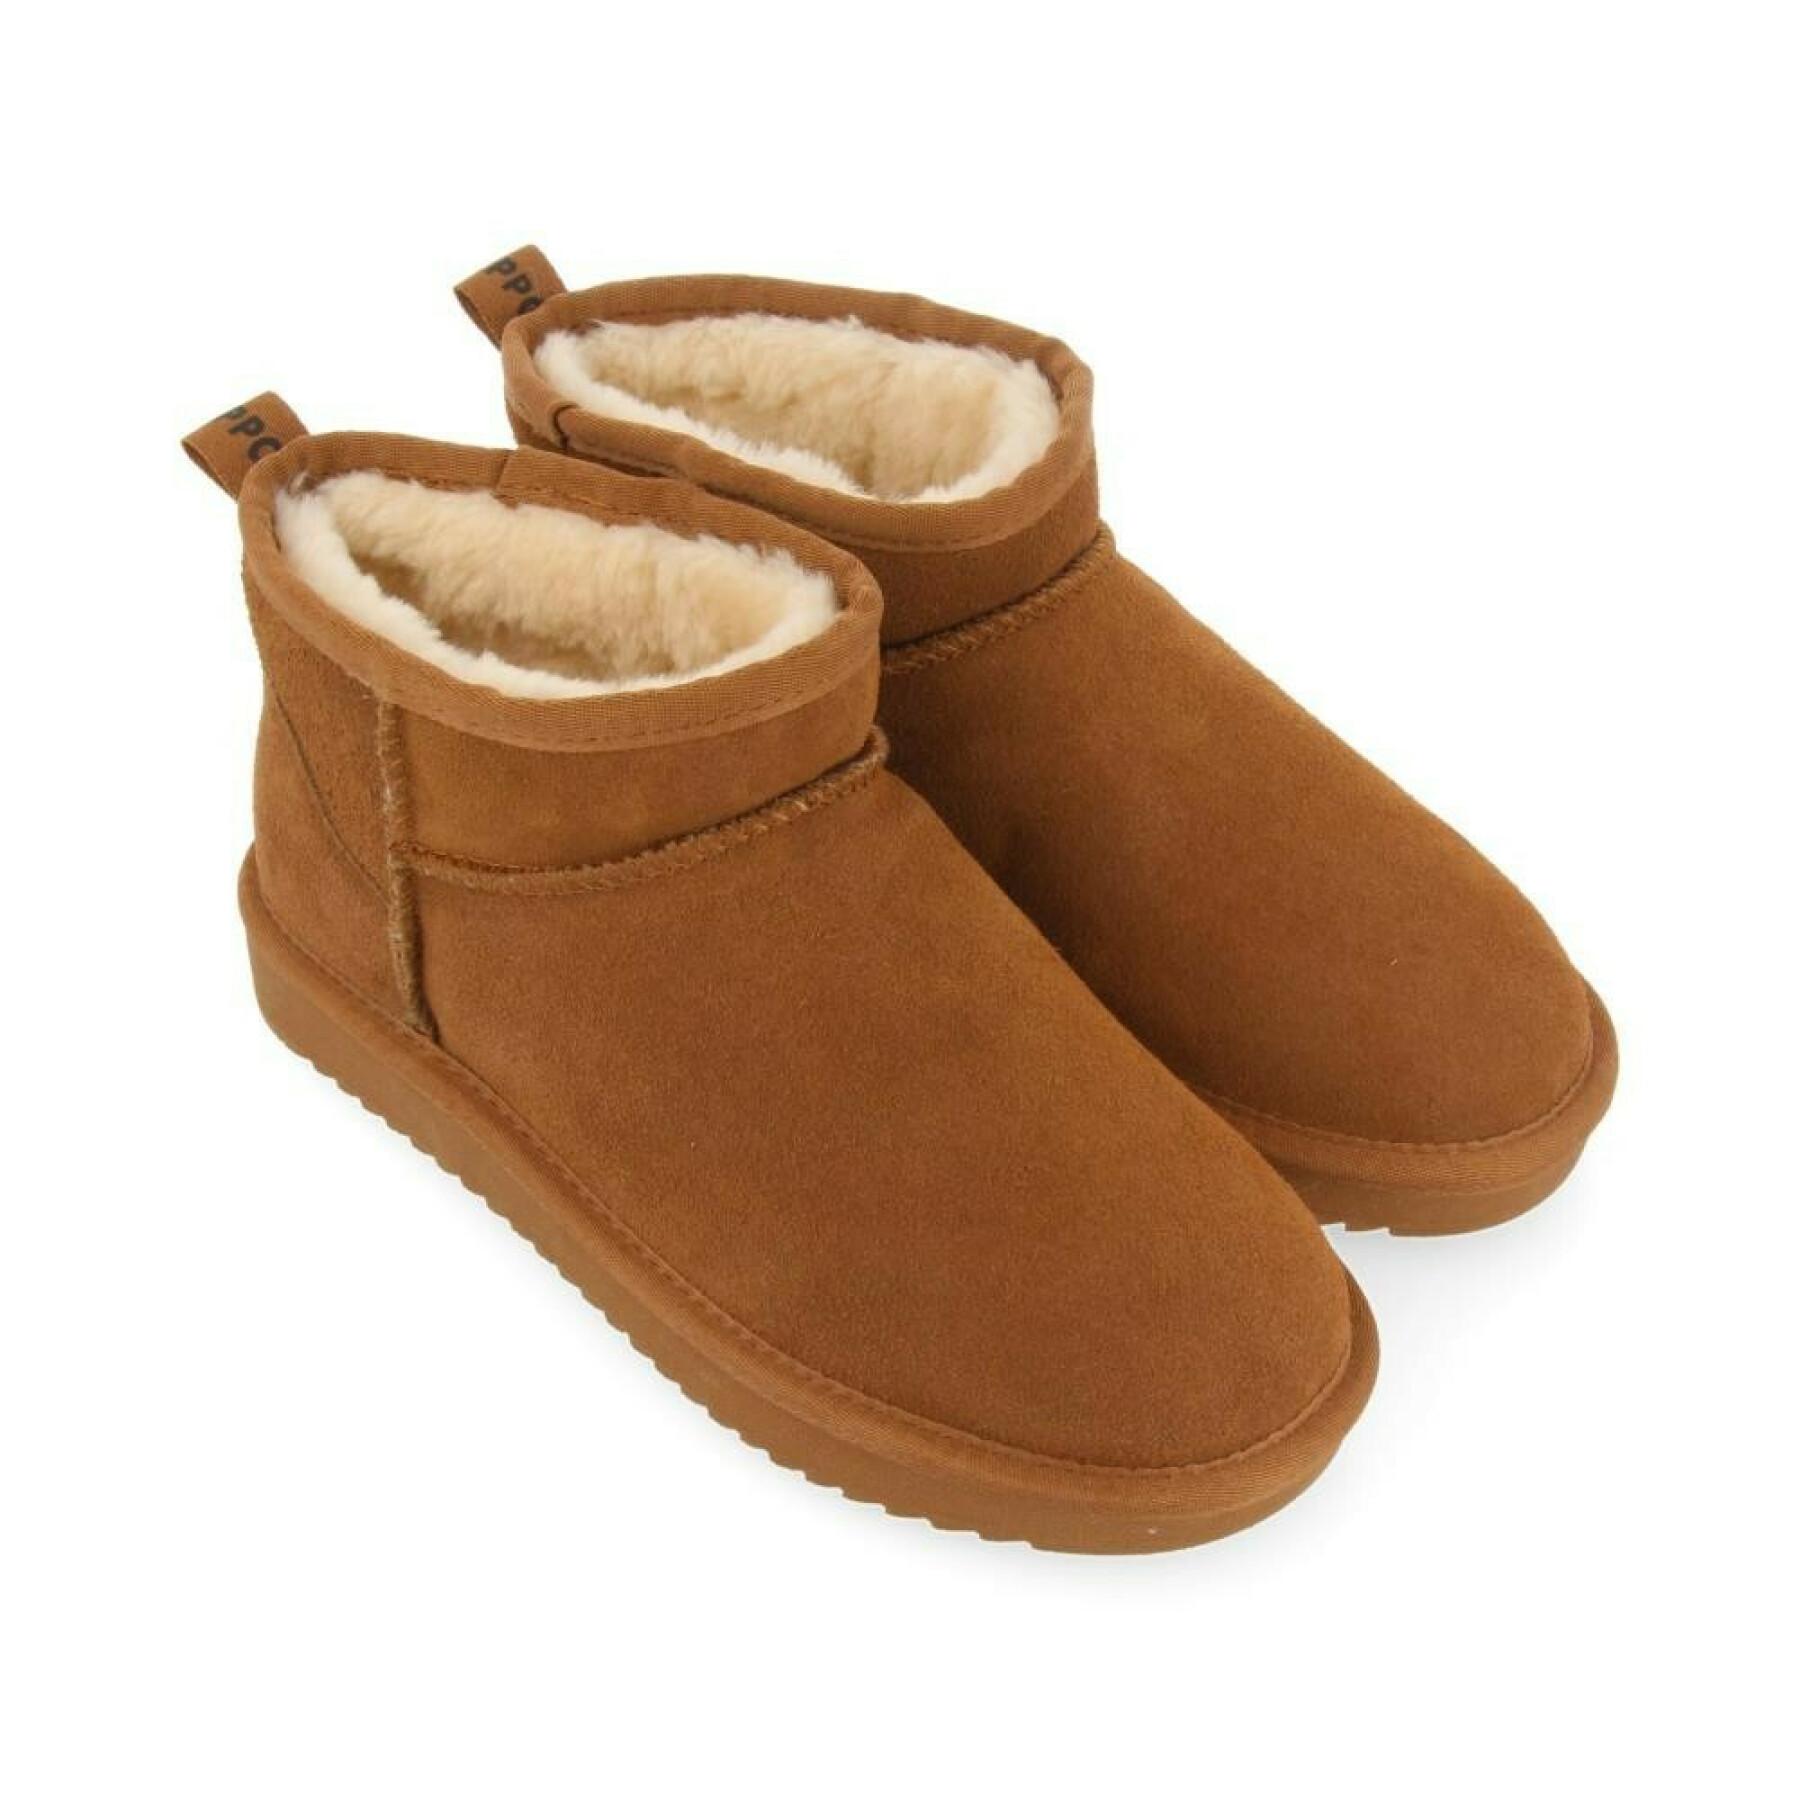 Low boots for women Gioseppo d'hivers camel